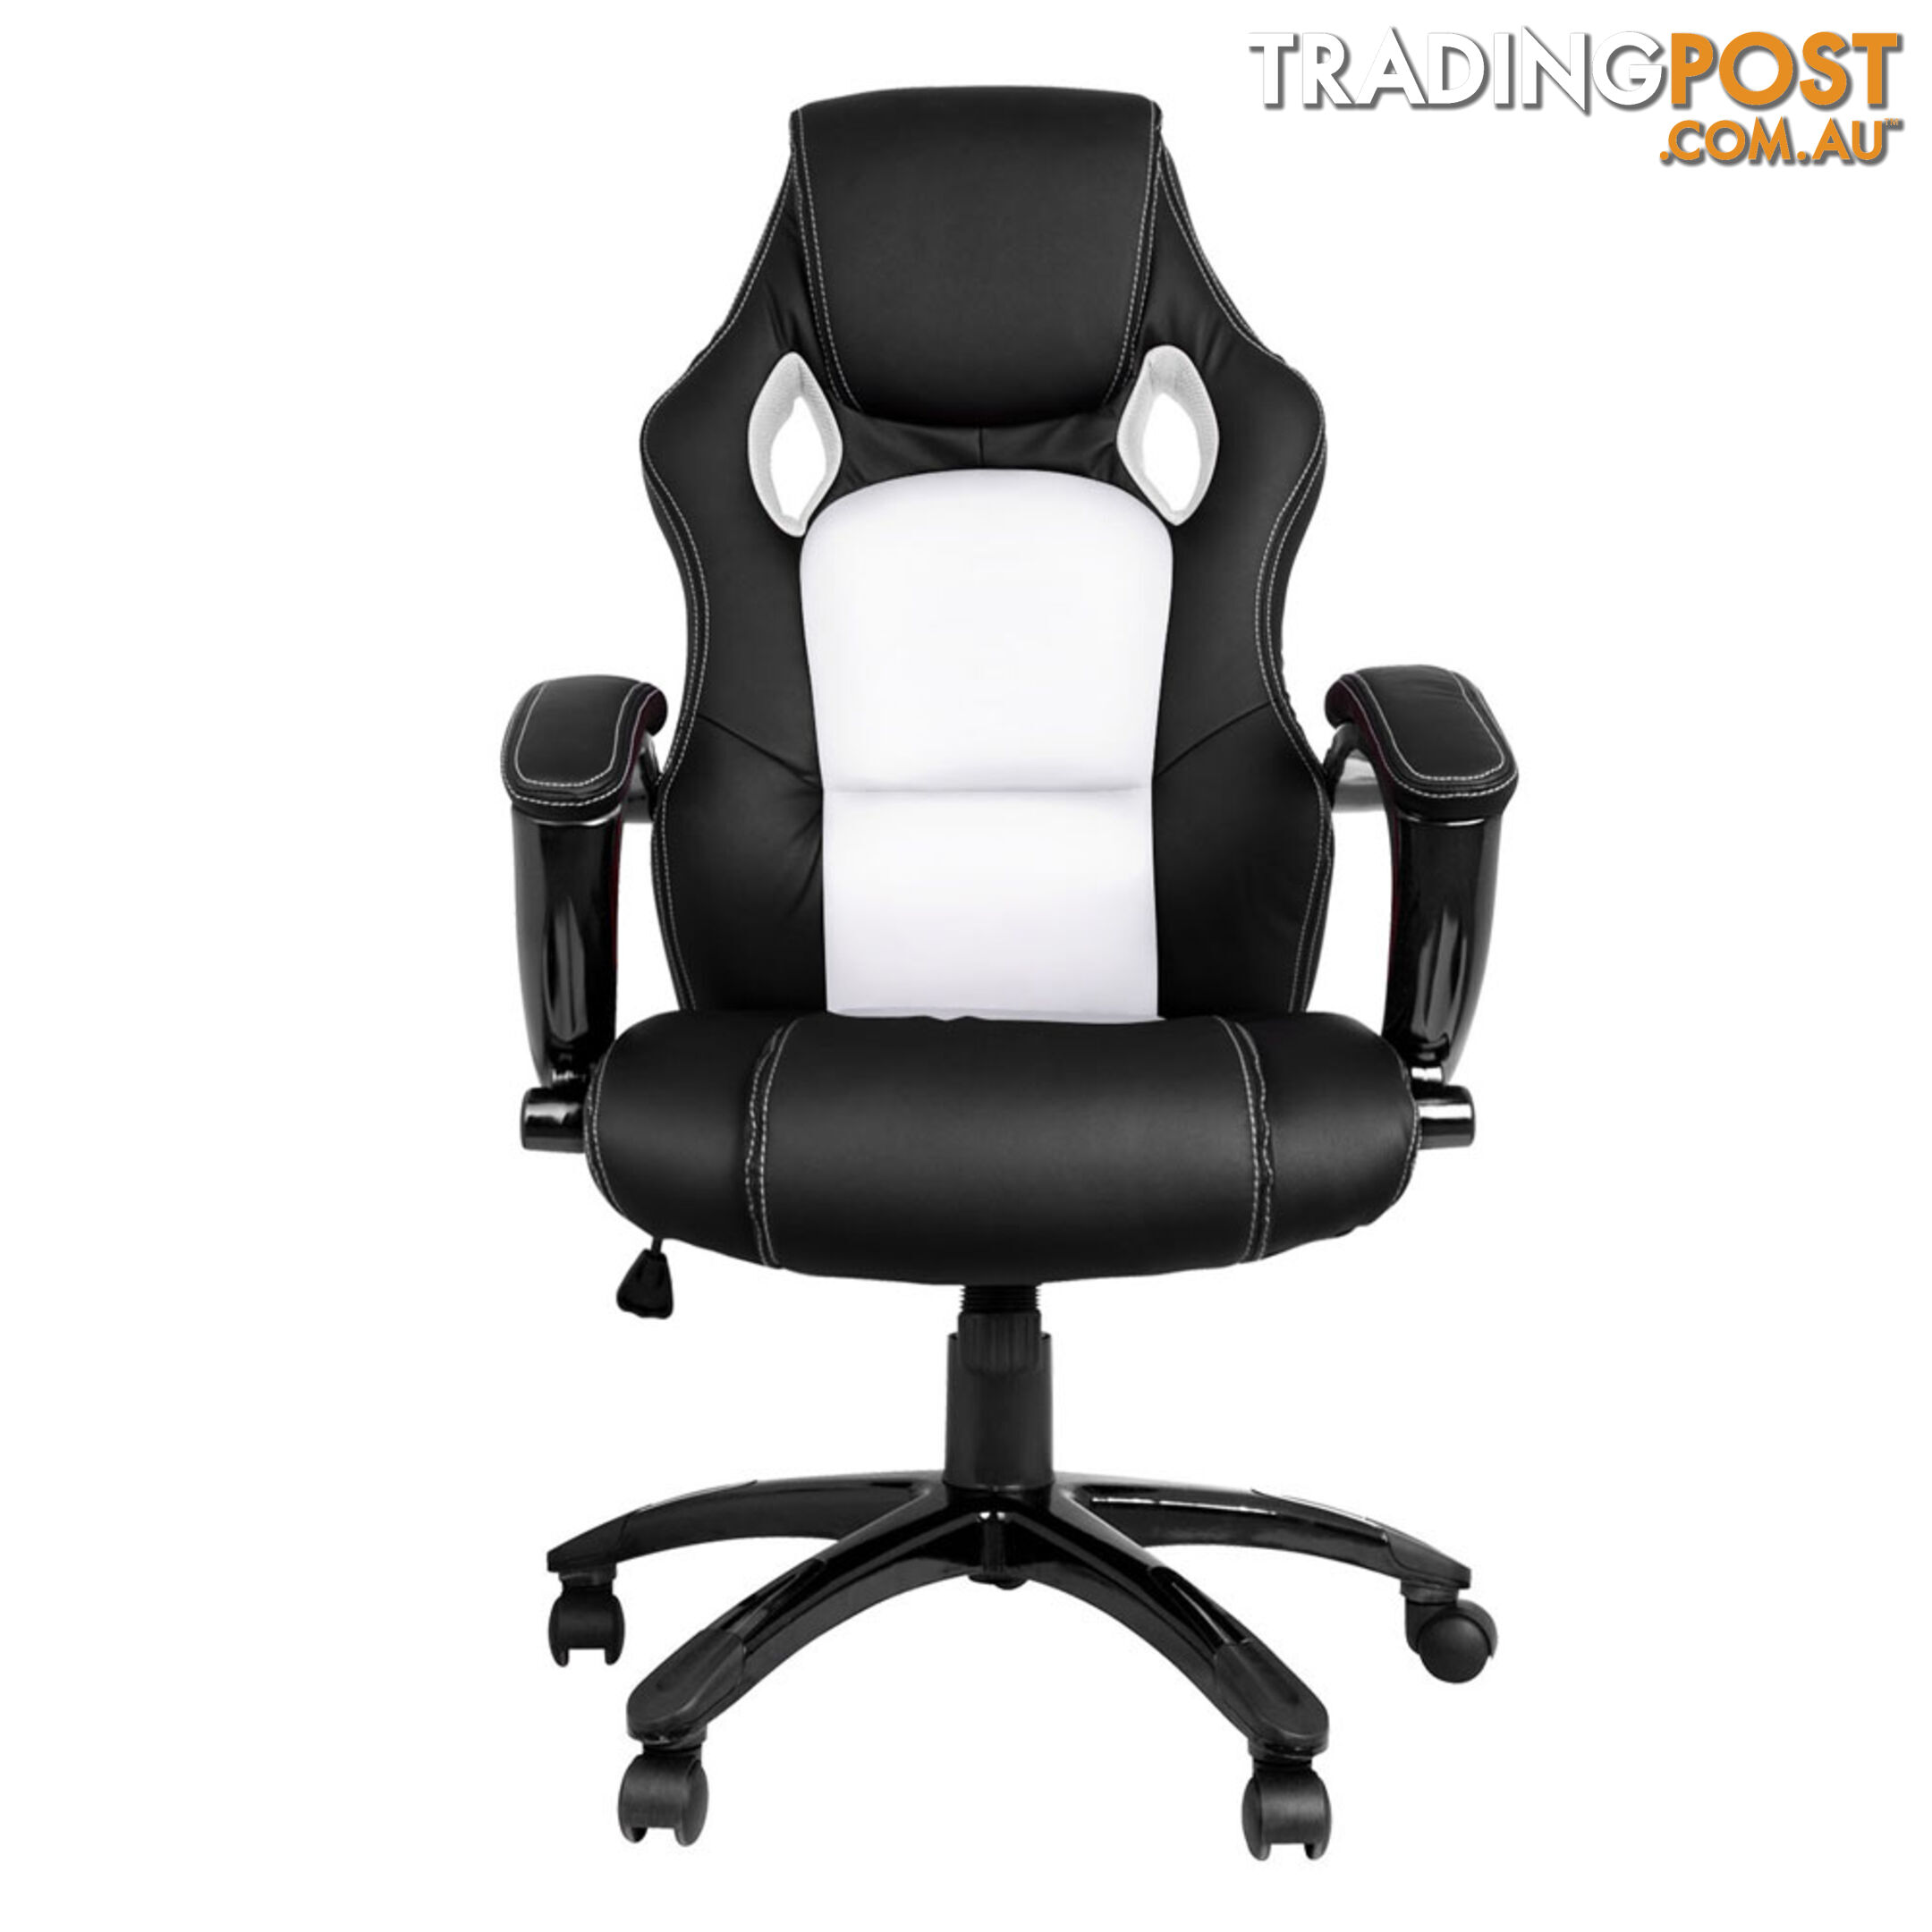 Executive Office Computer Chair PU Leather Racing Sport Gaming Seat Black White